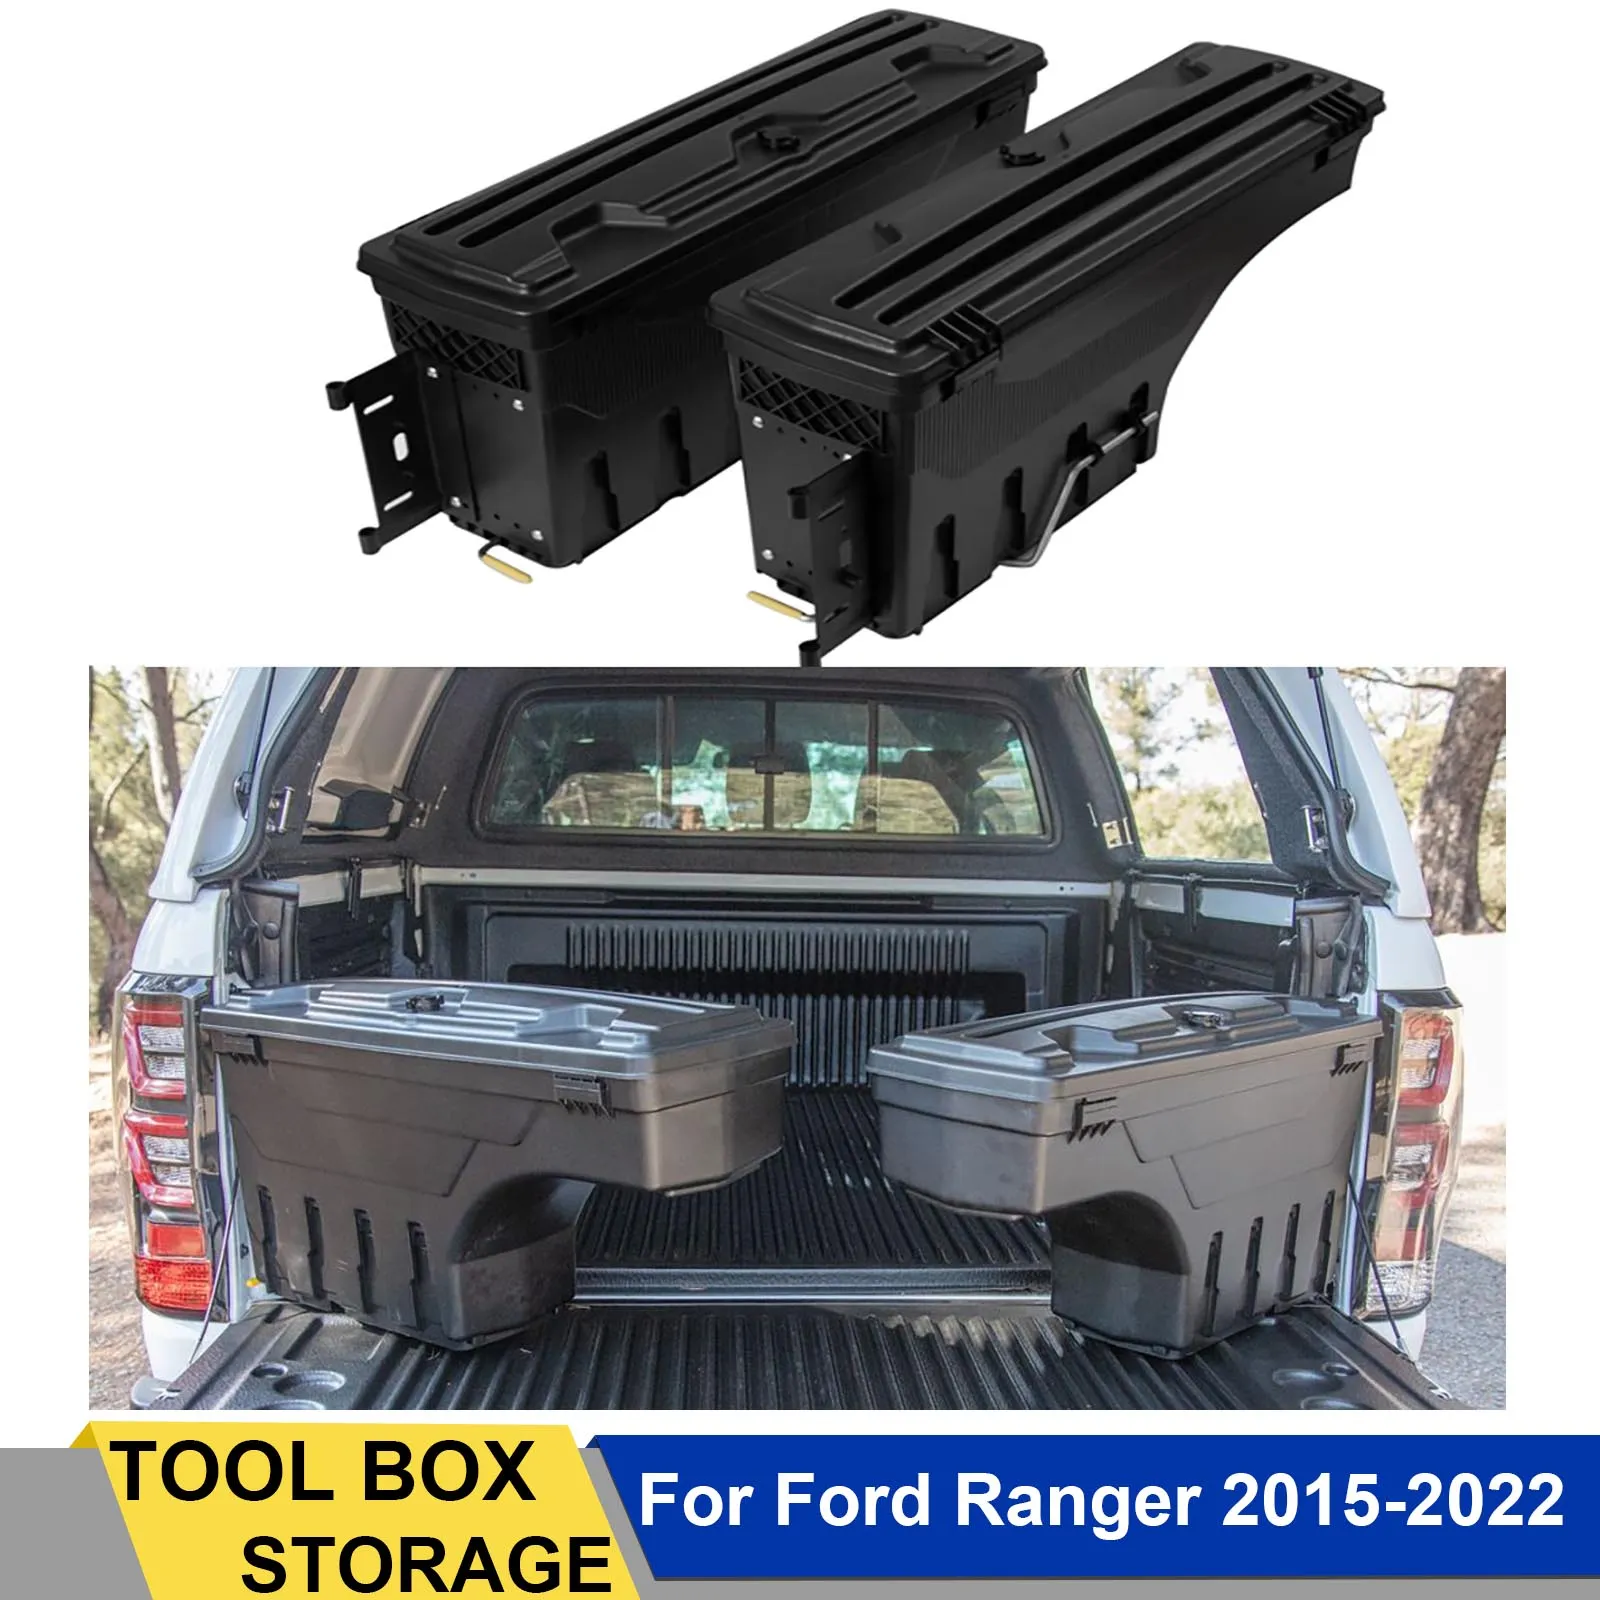 Truck Bed Utility Toolbox, Outdoor gear, Hunting, Tailgating 3D